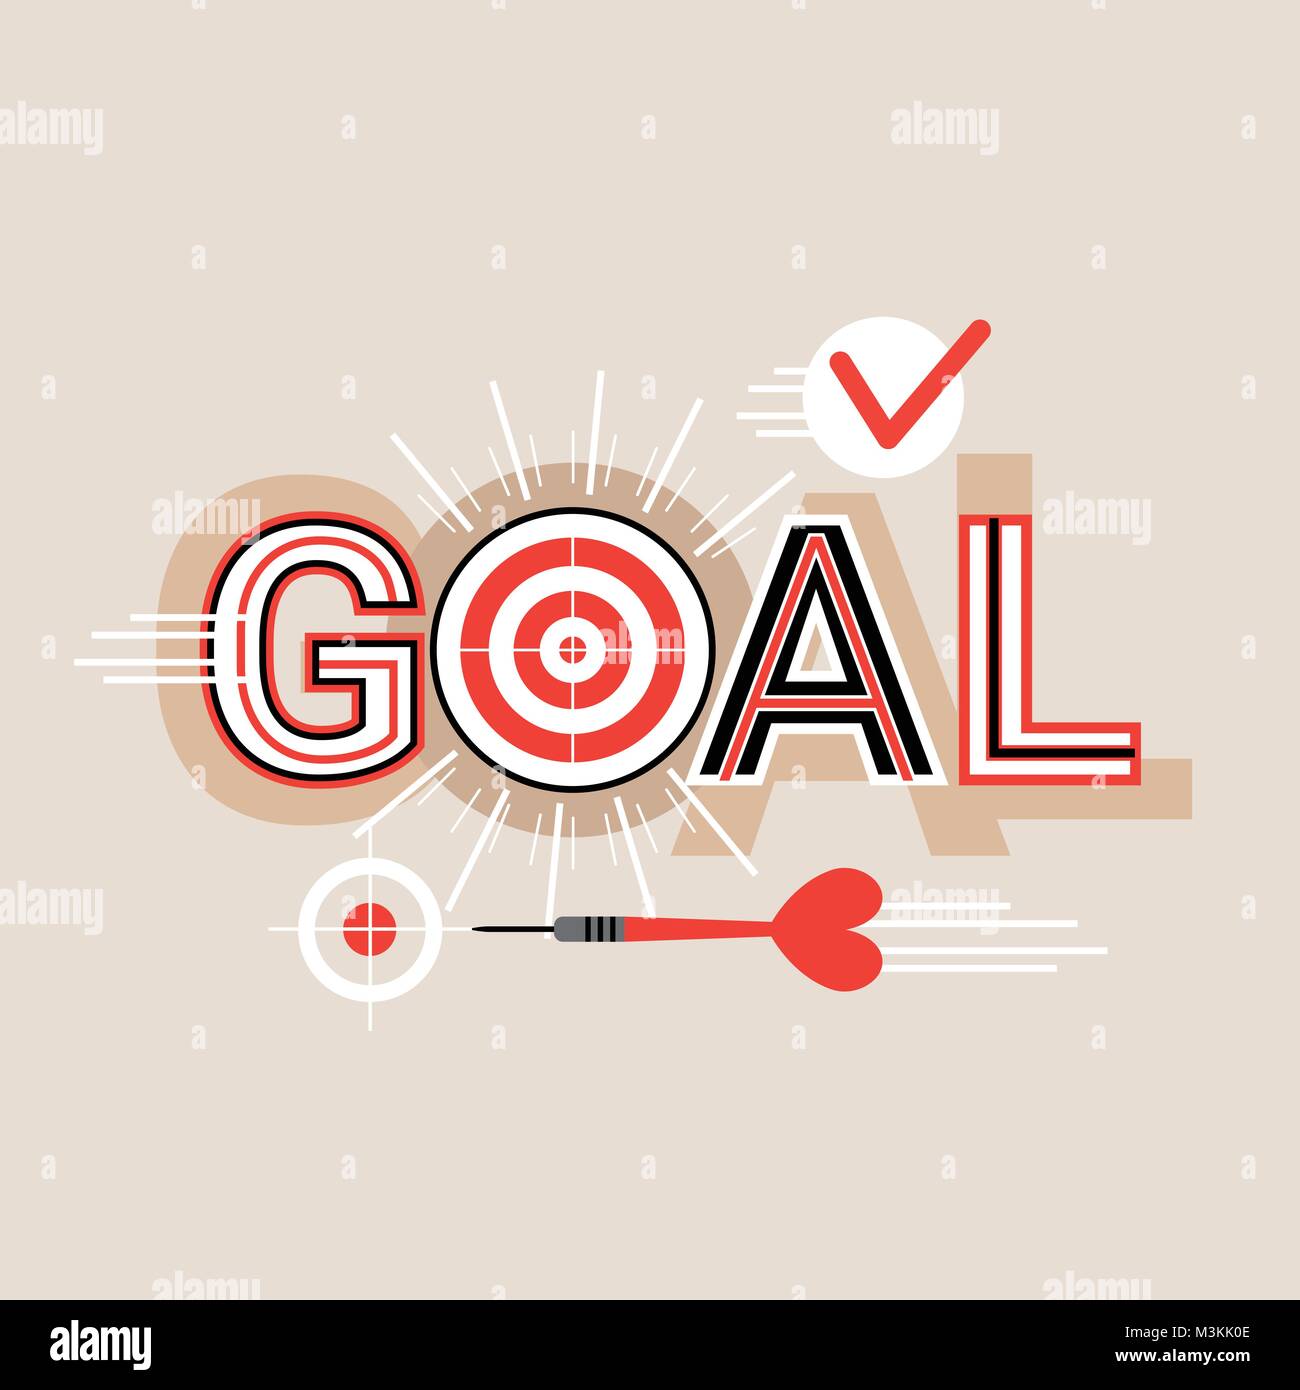 Goal Word Creative Graphic Design Modern Business Concept Over Abstract Geometric Shapes Background Stock Vector Image Art Alamy